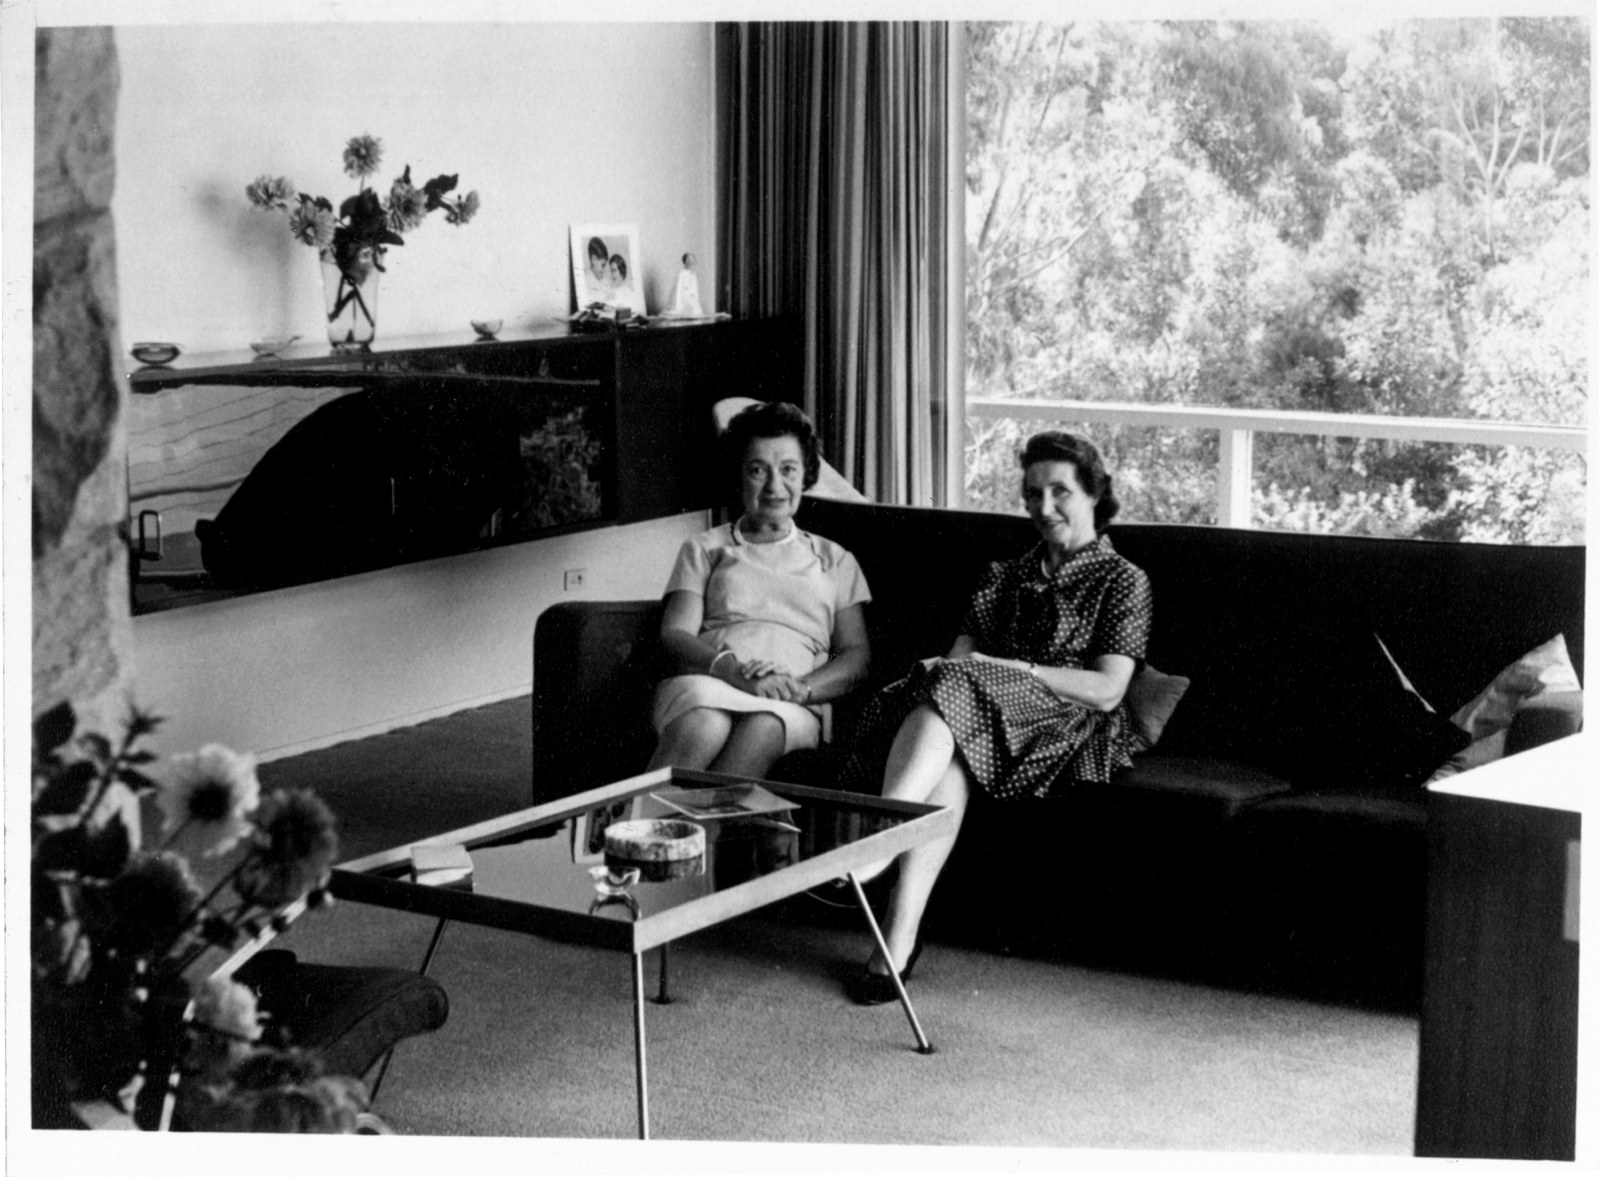 B/W photo showing two women sitting in couch in living room with coffee table in front, sideboard beside them and large window and curtains, with trees visible outside.